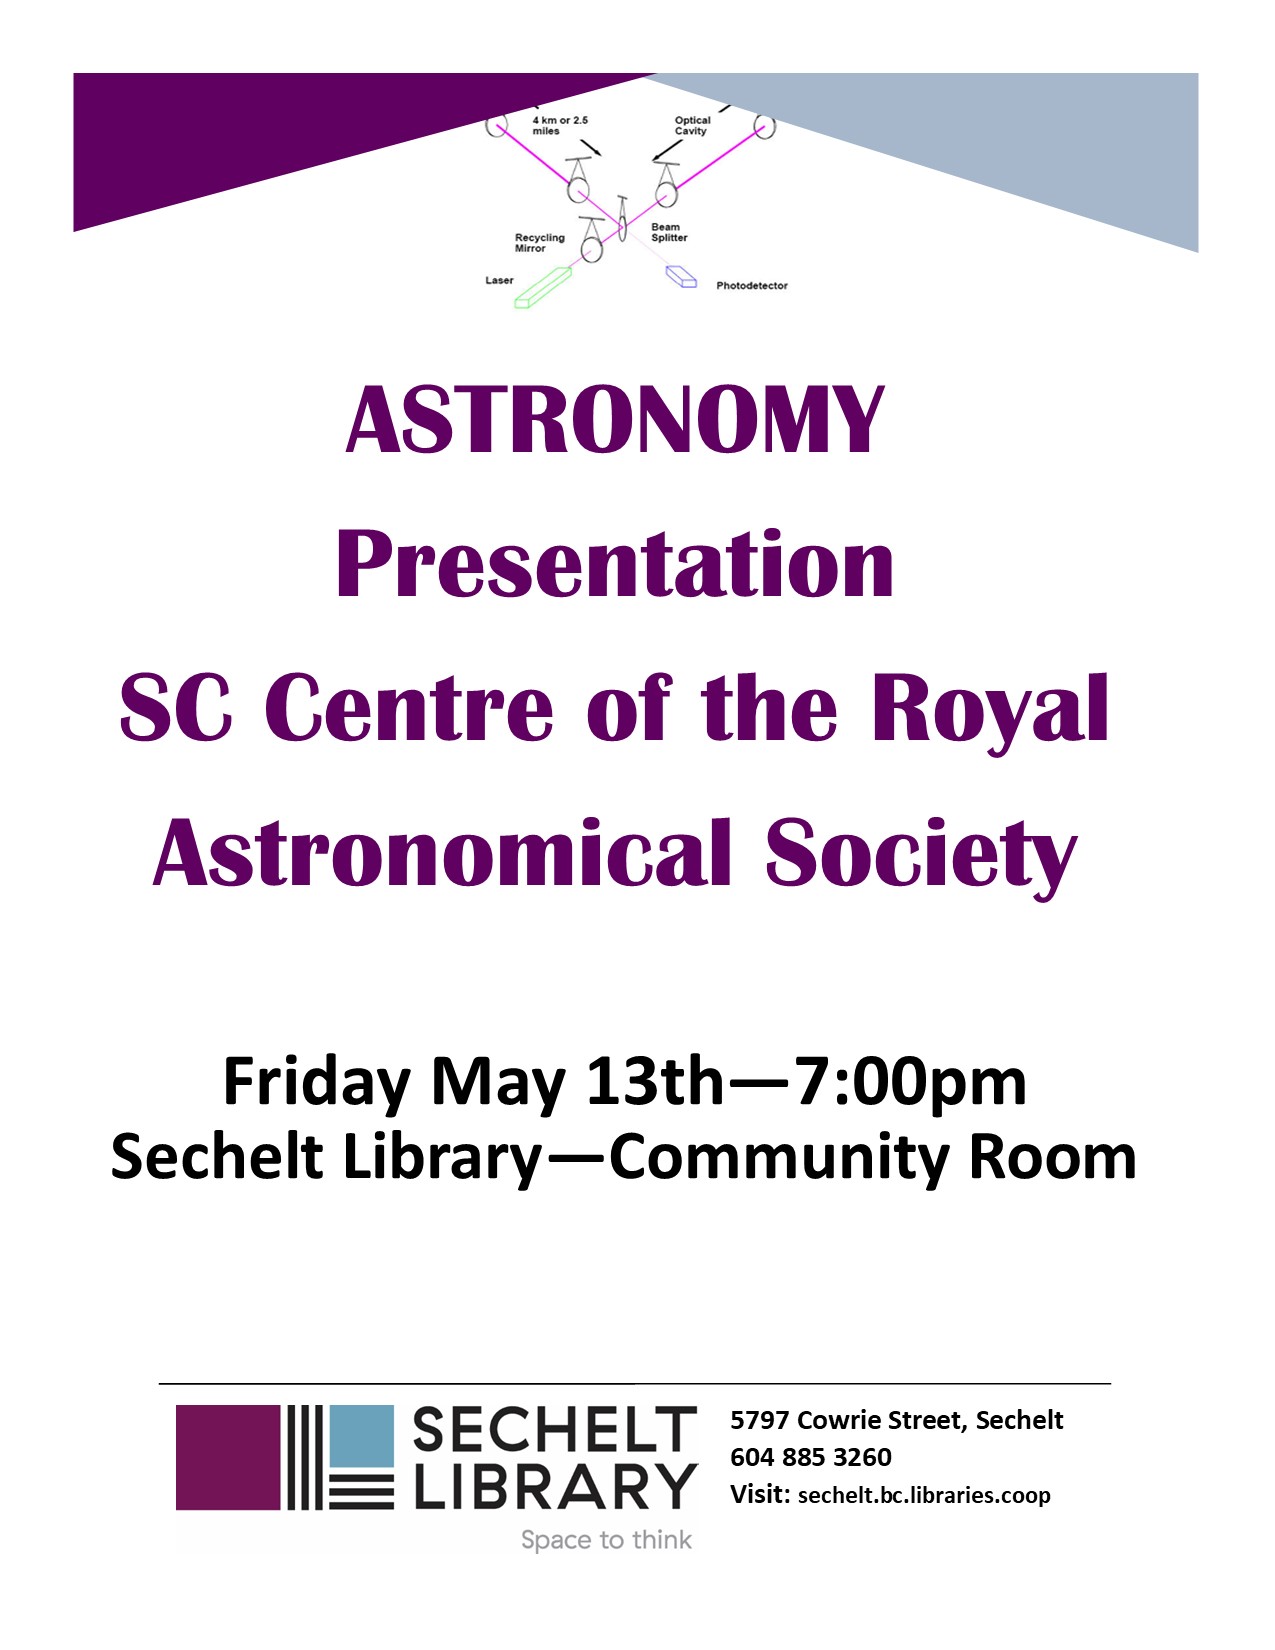 information about Astronomy Club Meeting on Friday May 13th at 7pm